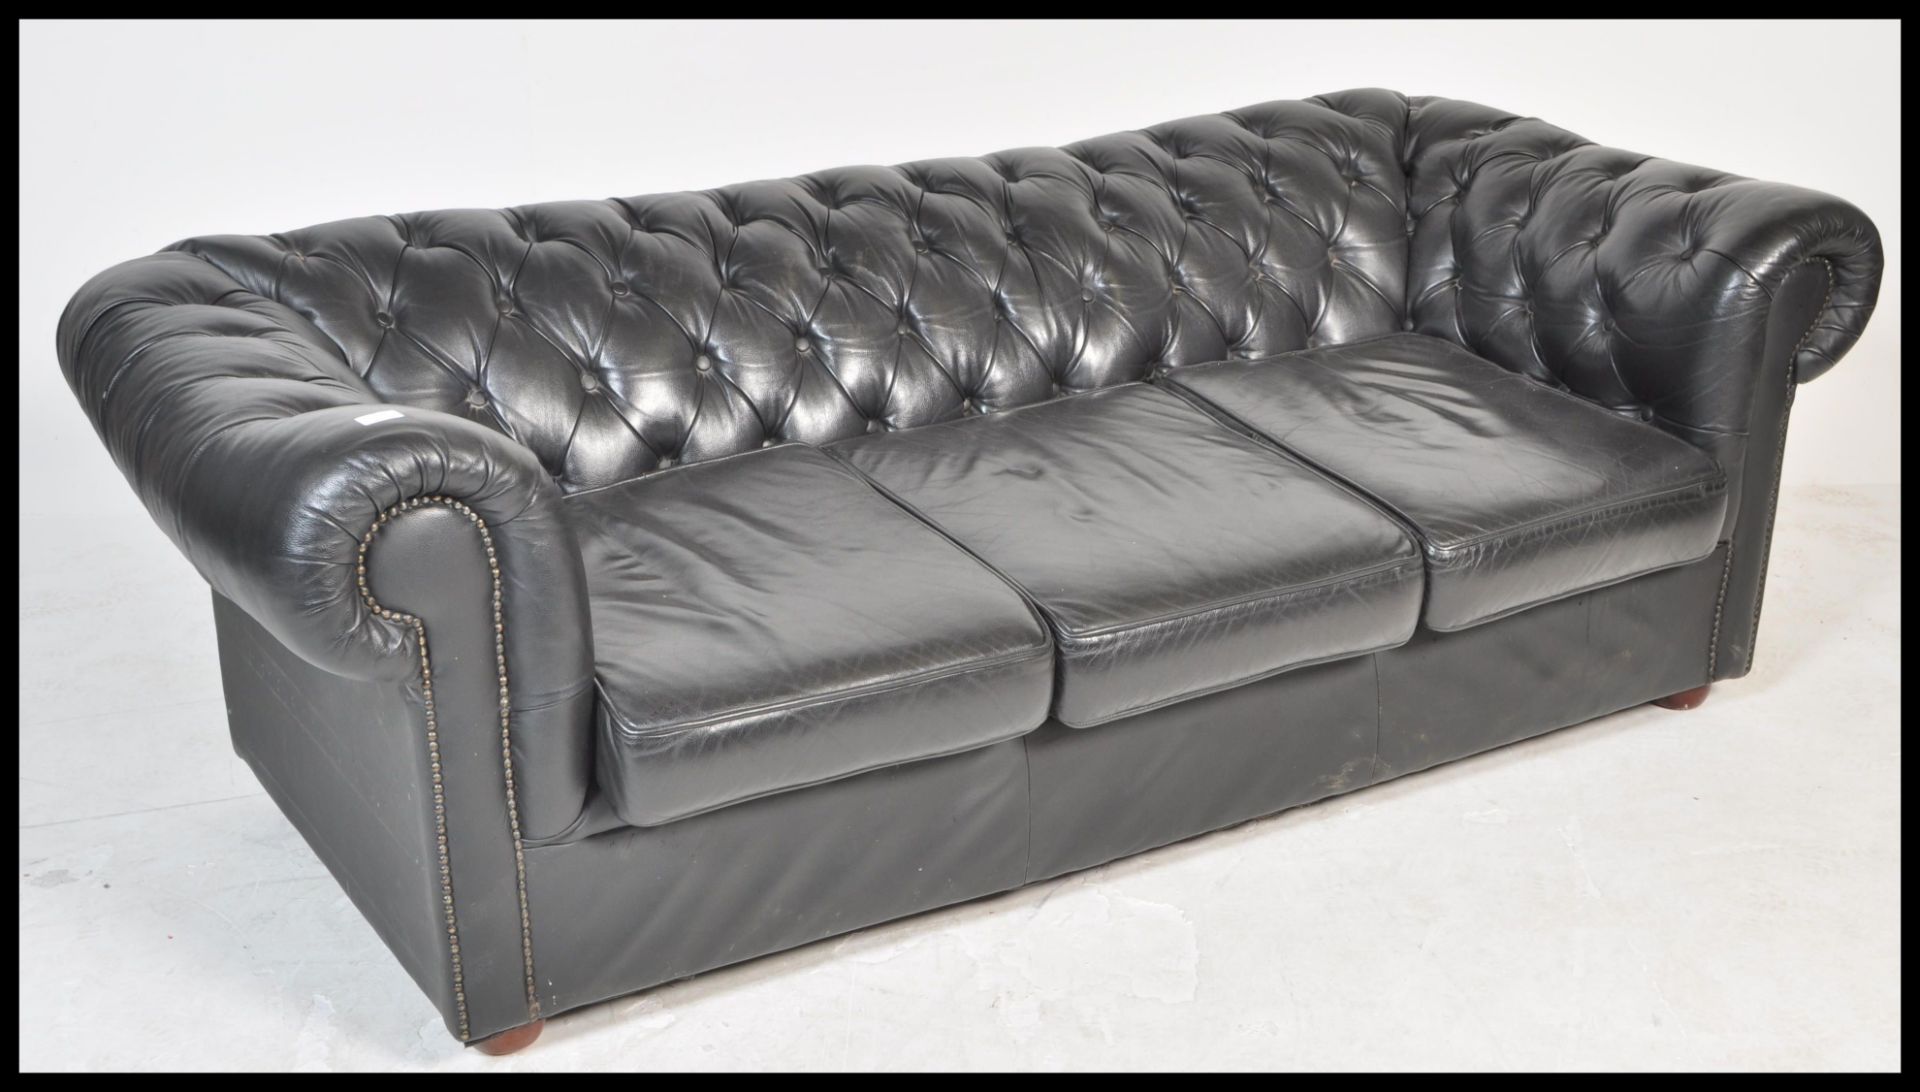 A contemporary black leather button back three seater Chesterfield sofa with button back and - Image 2 of 5